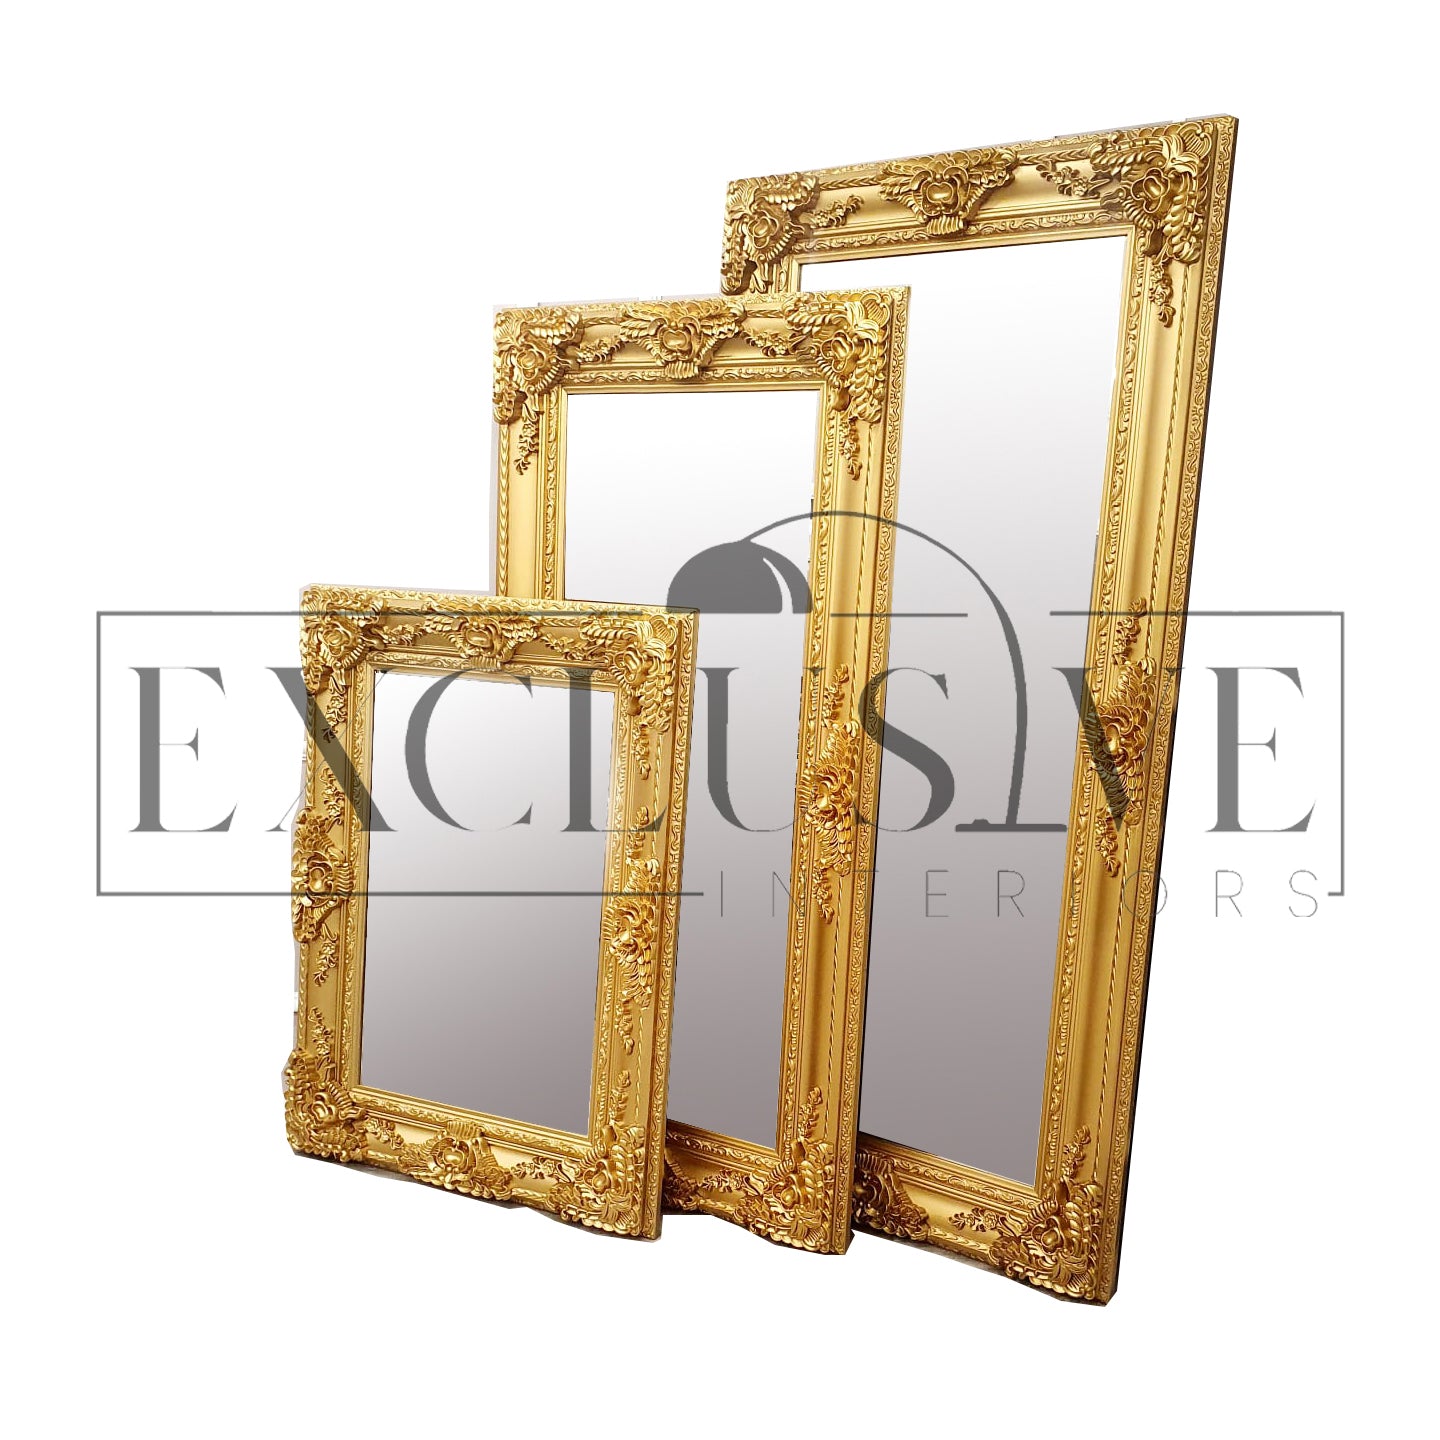 Decorative entryway mirrors, wall mirrors, framed mirror, full-length mirrors, antique mirrors contemporary Gold rustic mirrors full length or short mirrors